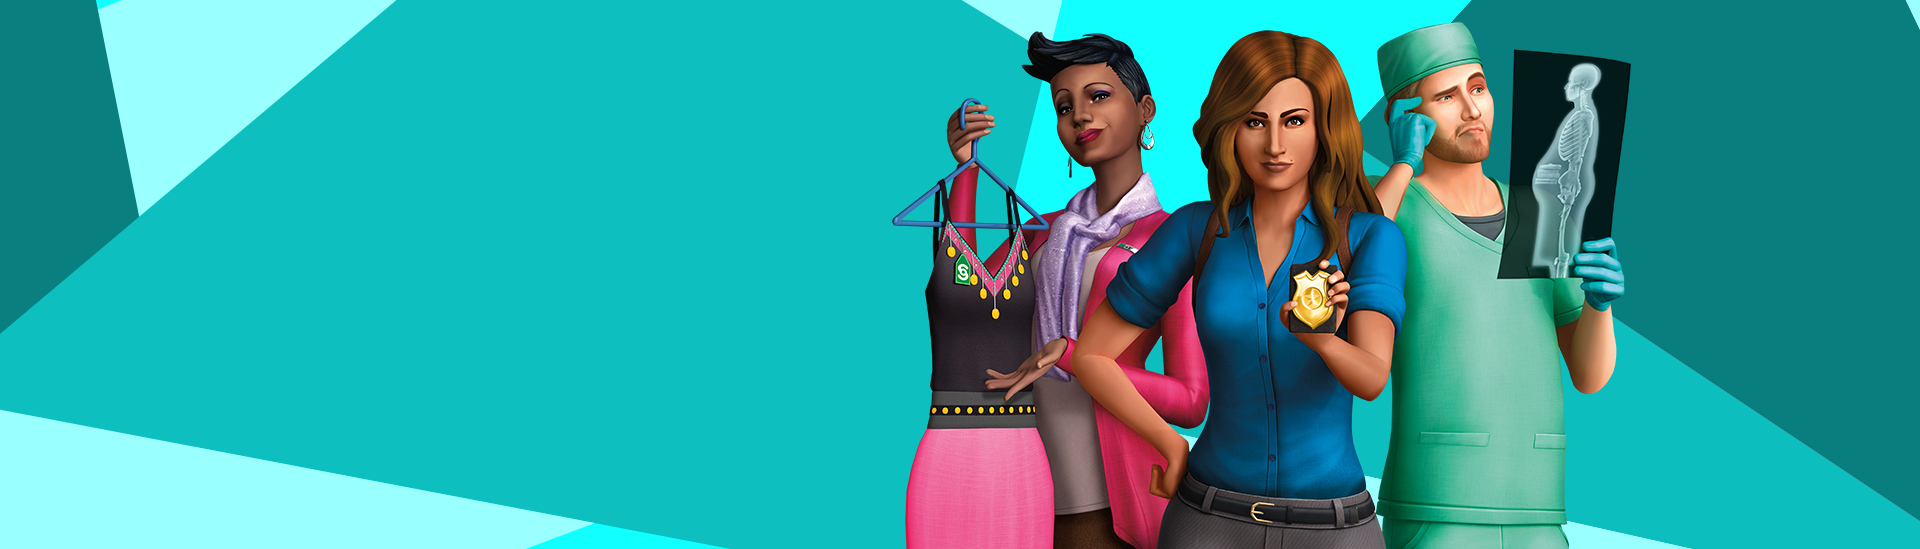 sims 4 get together or get to work